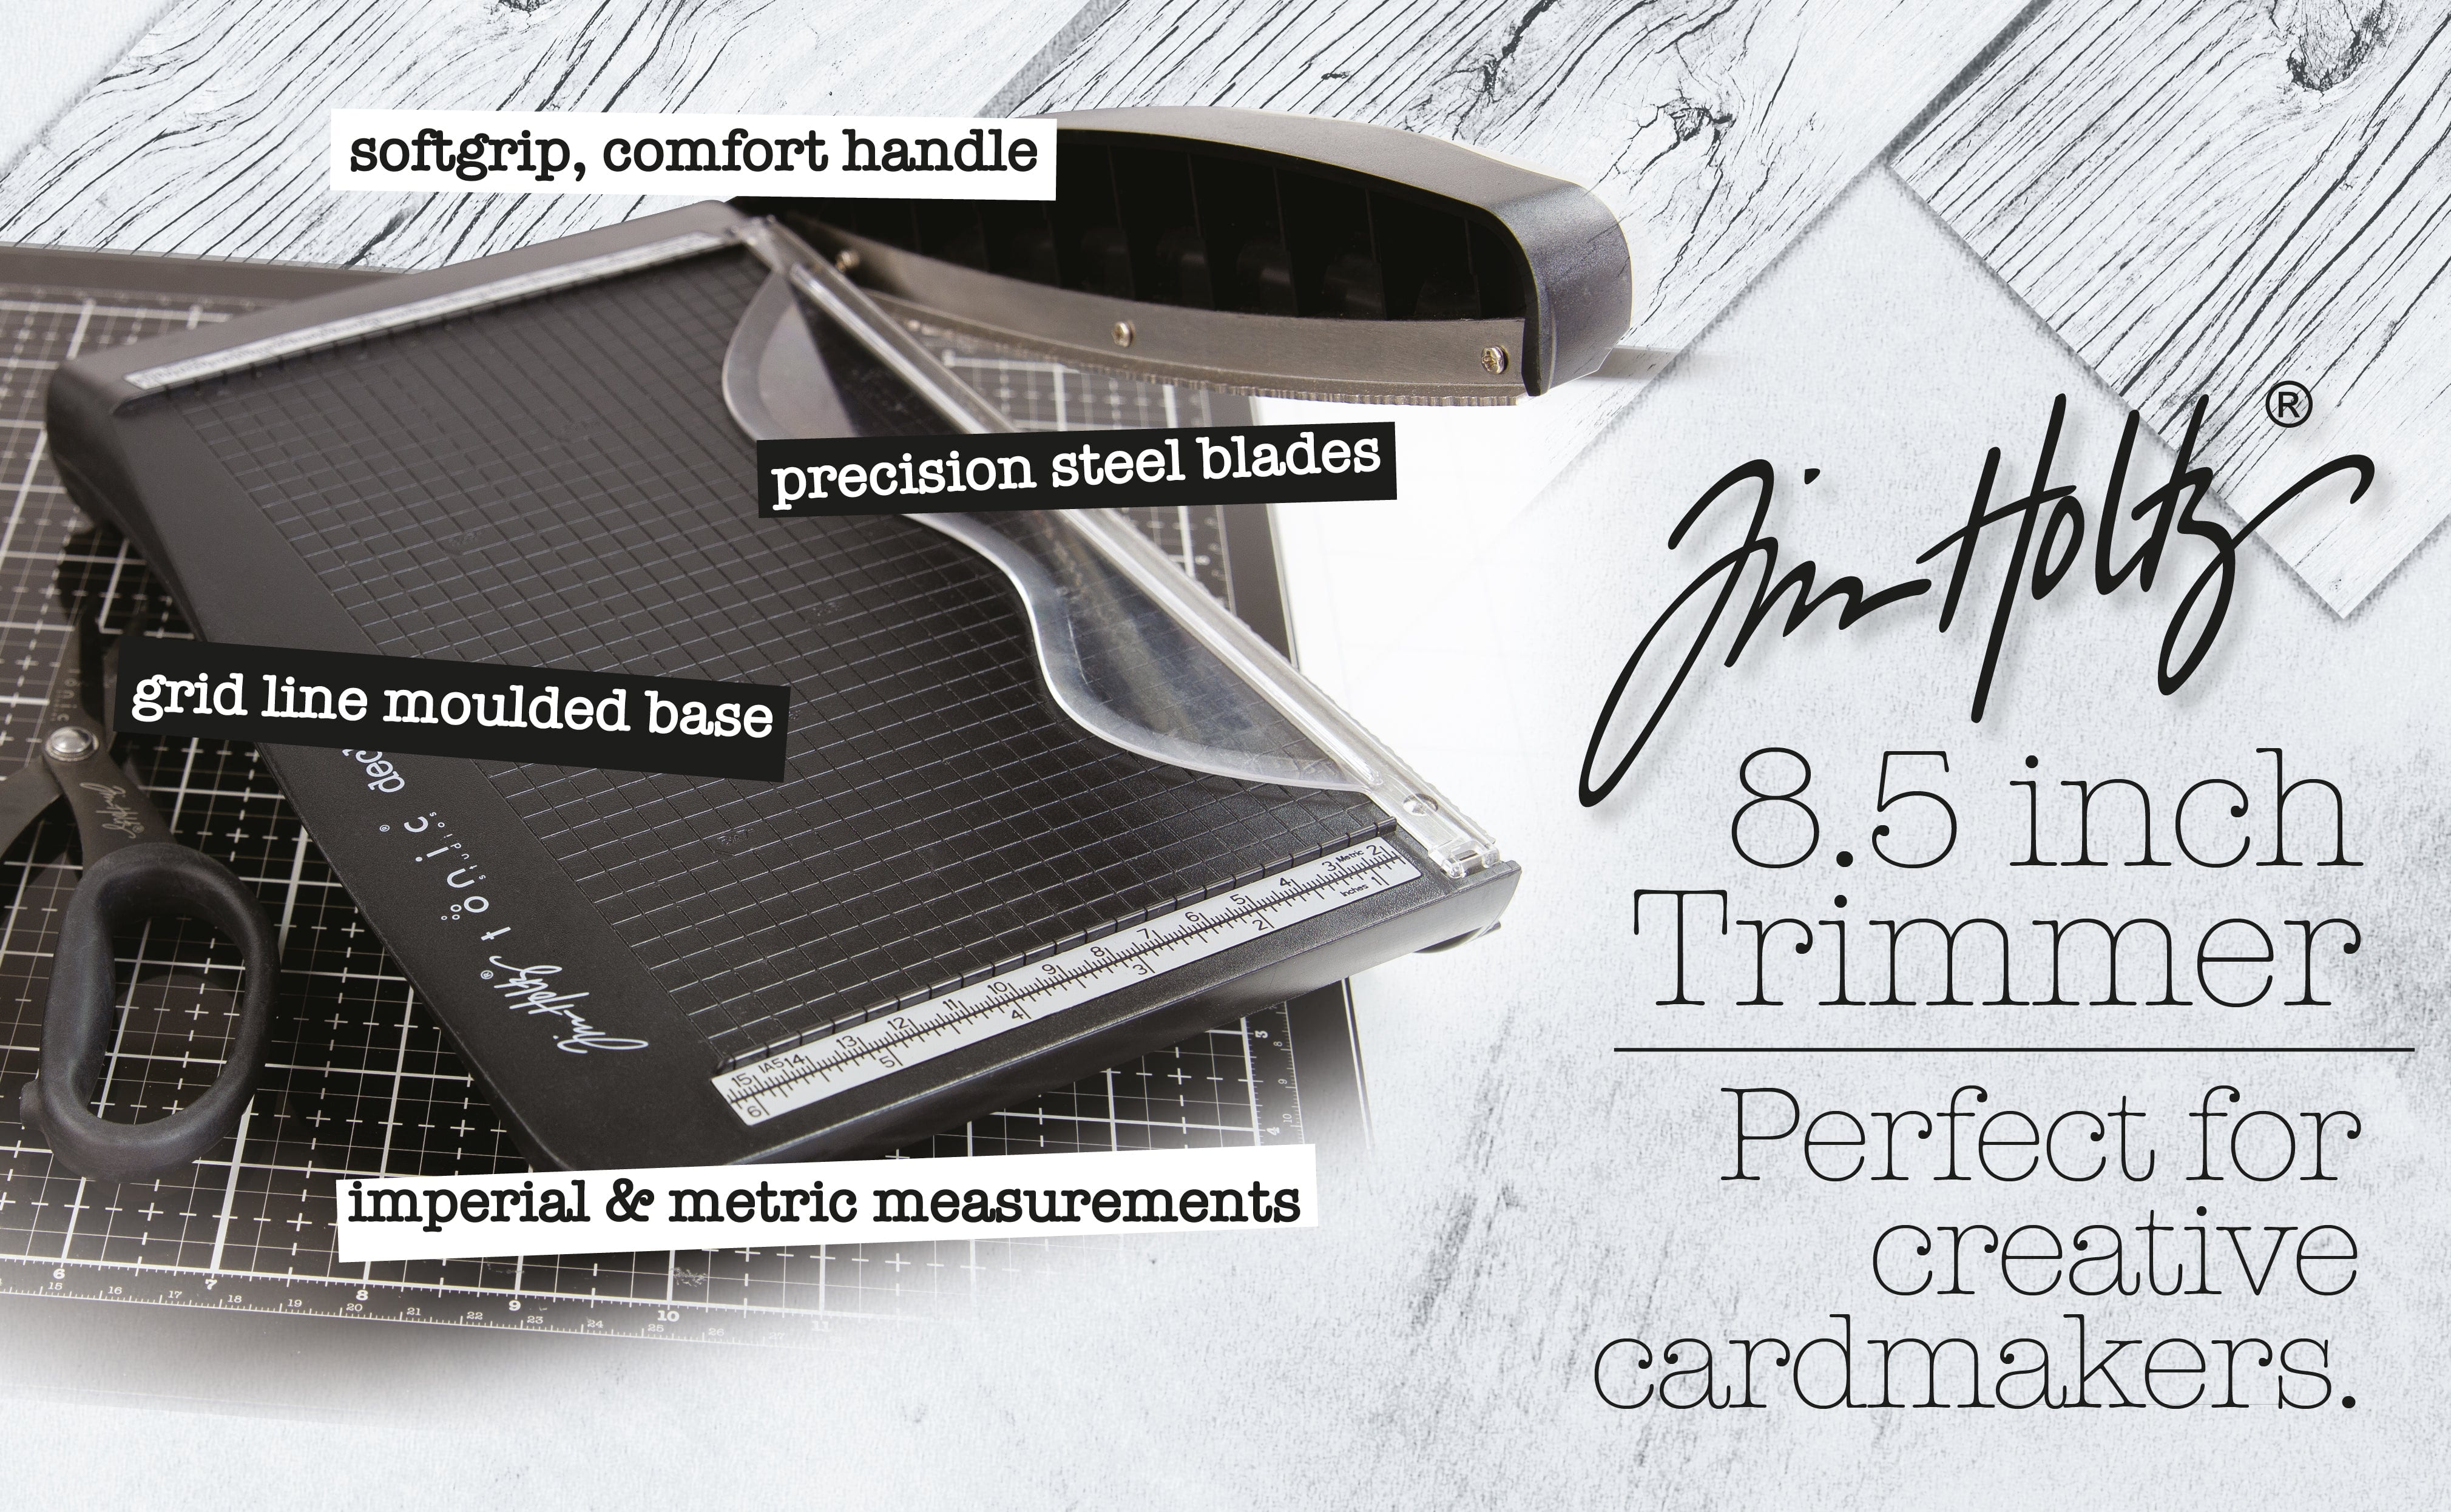 Deckle Trimmer 8.5 Torn Edge Trimmer cutter by Tim Holtz & Tonic Studios 